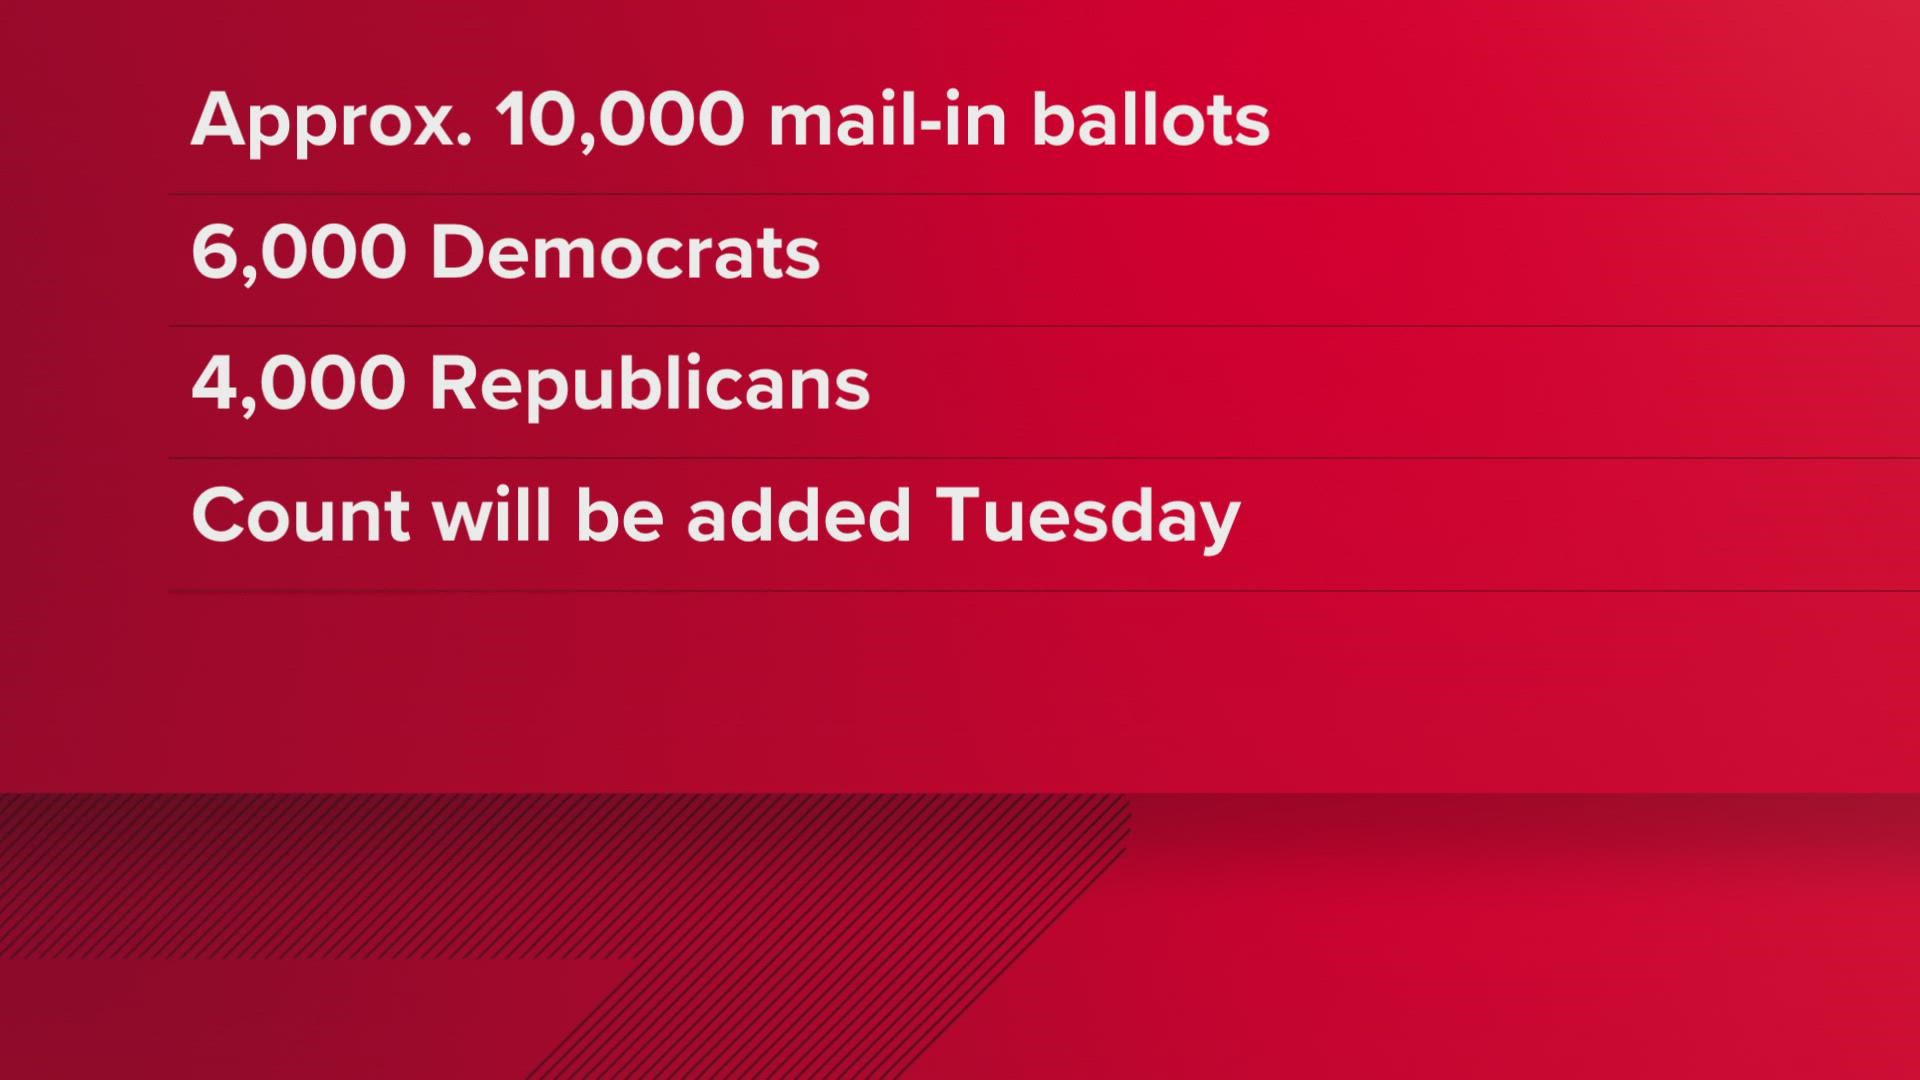 The Harris County Elections Office says those roughly 10,000 ballots will go into the final number Tuesday.